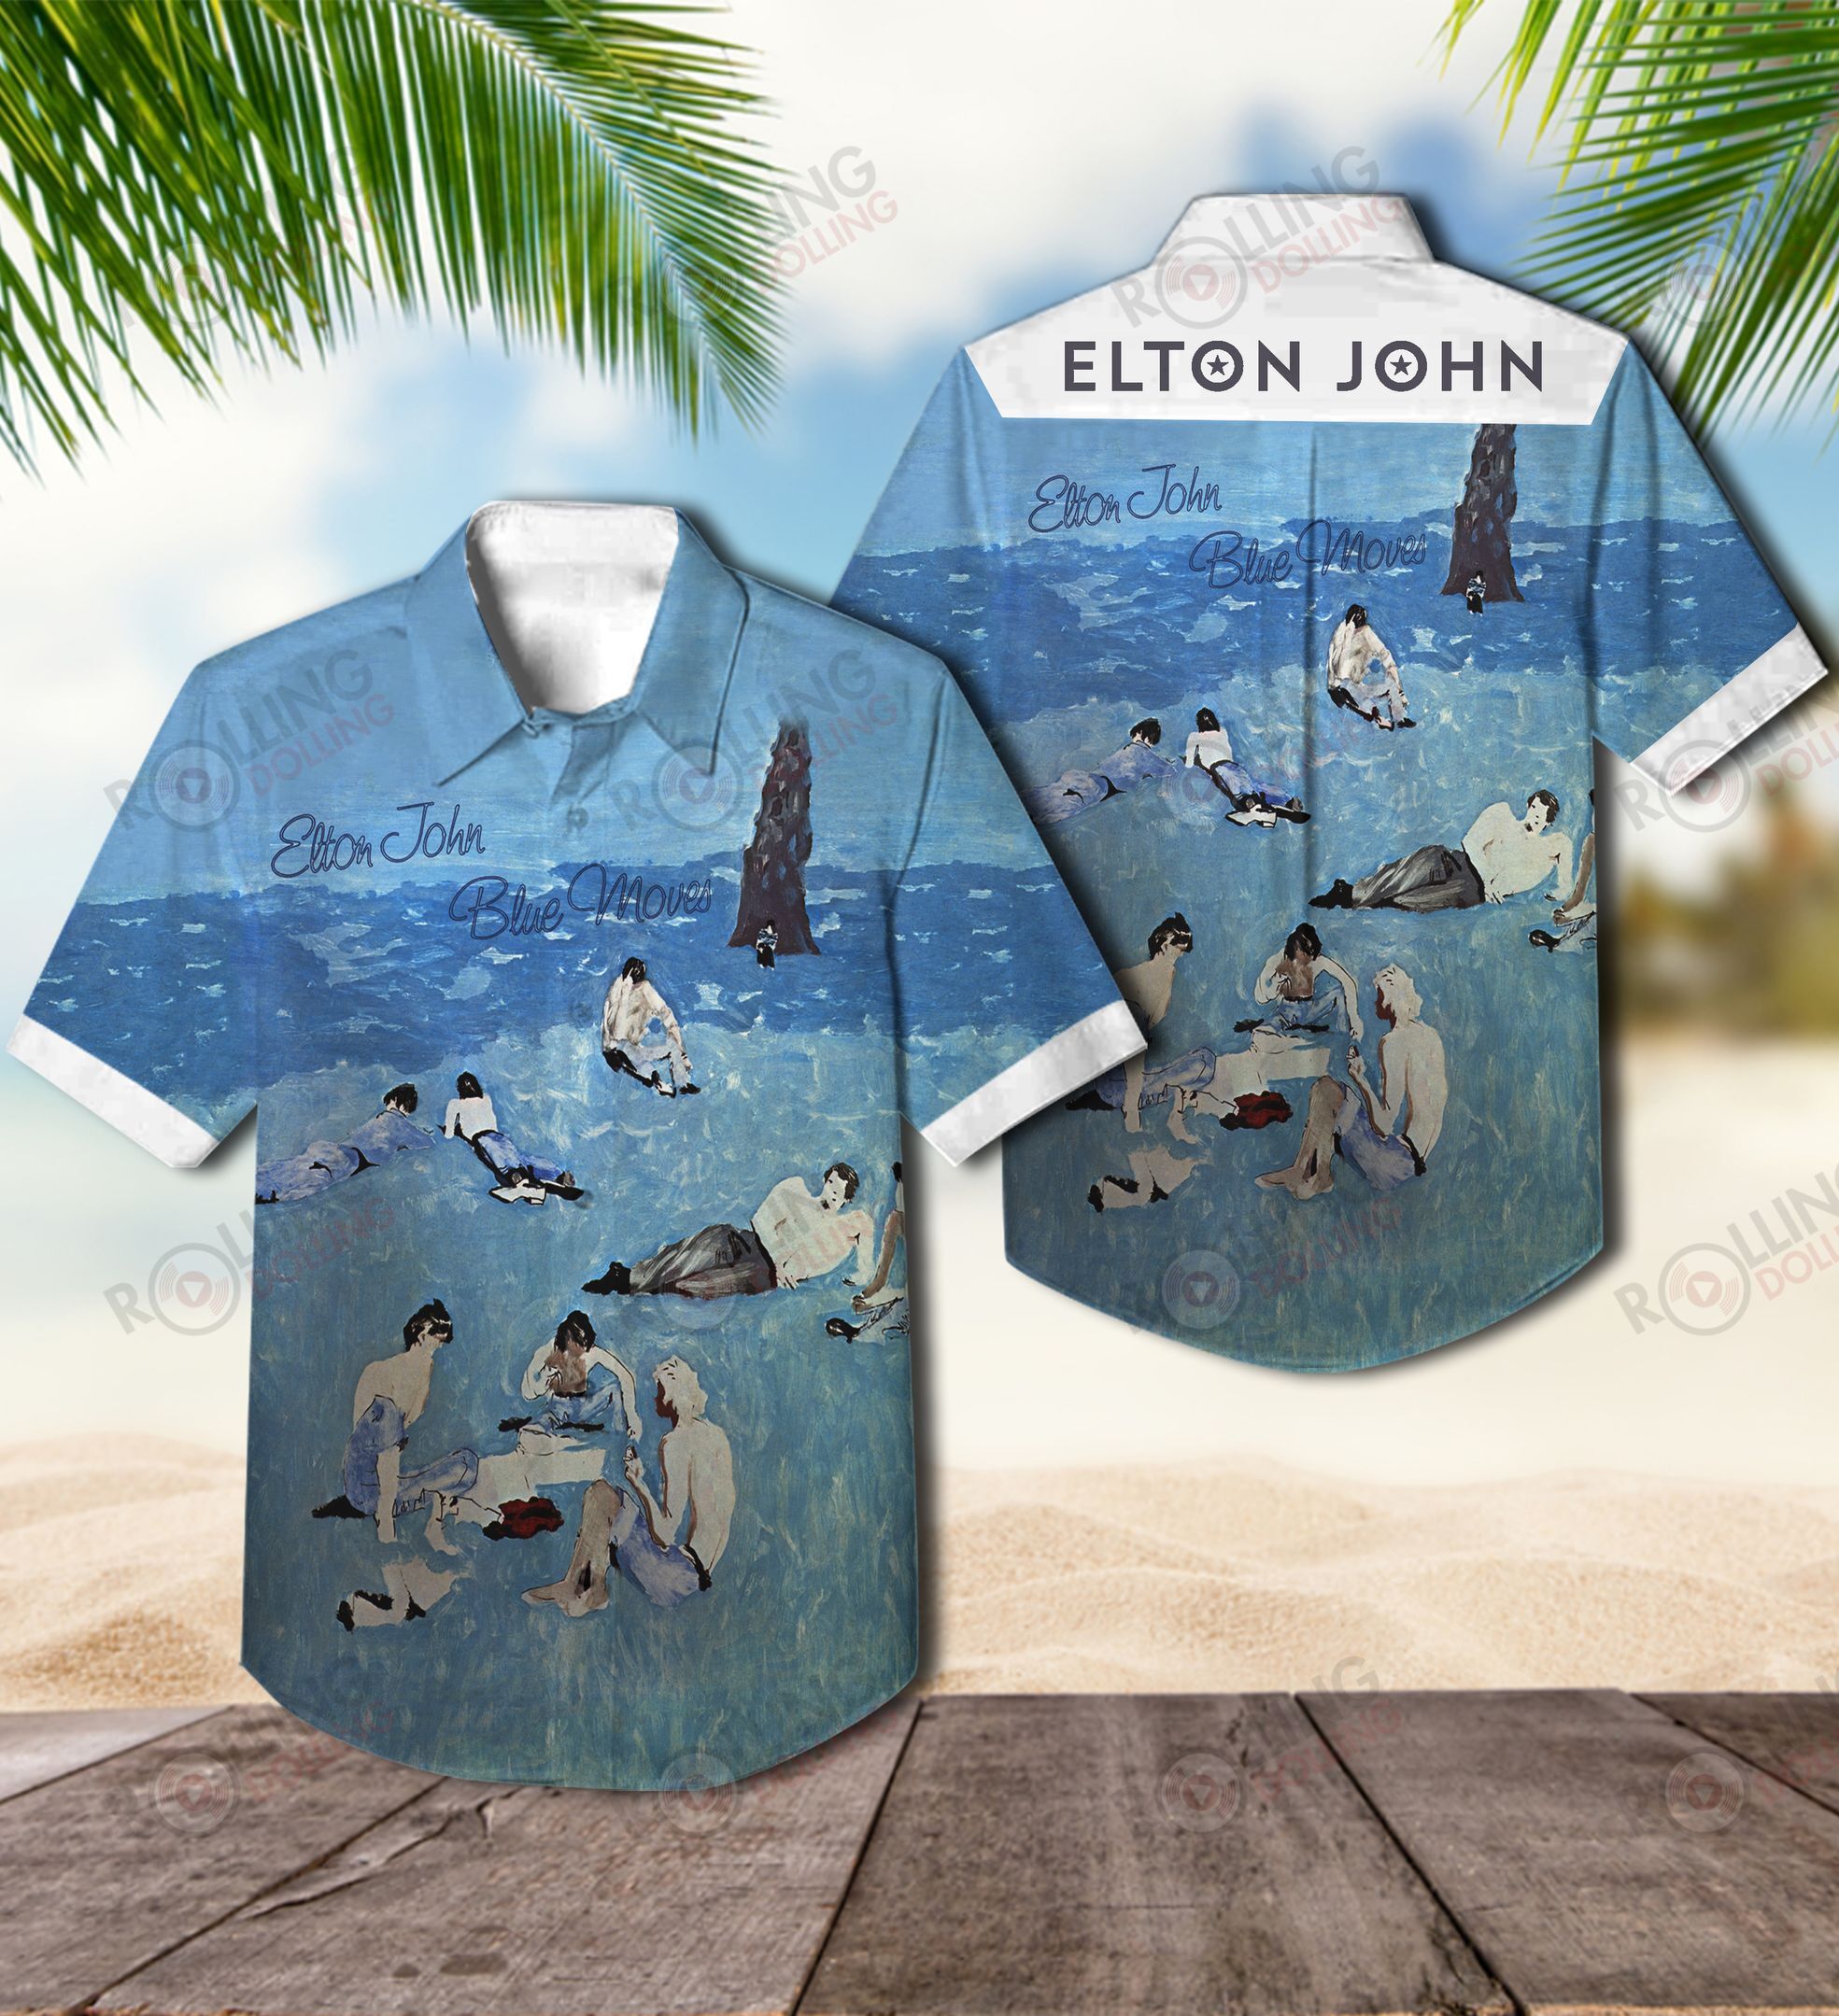 For summer, consider wearing This Amazing Hawaiian Shirt shirt in our store 45